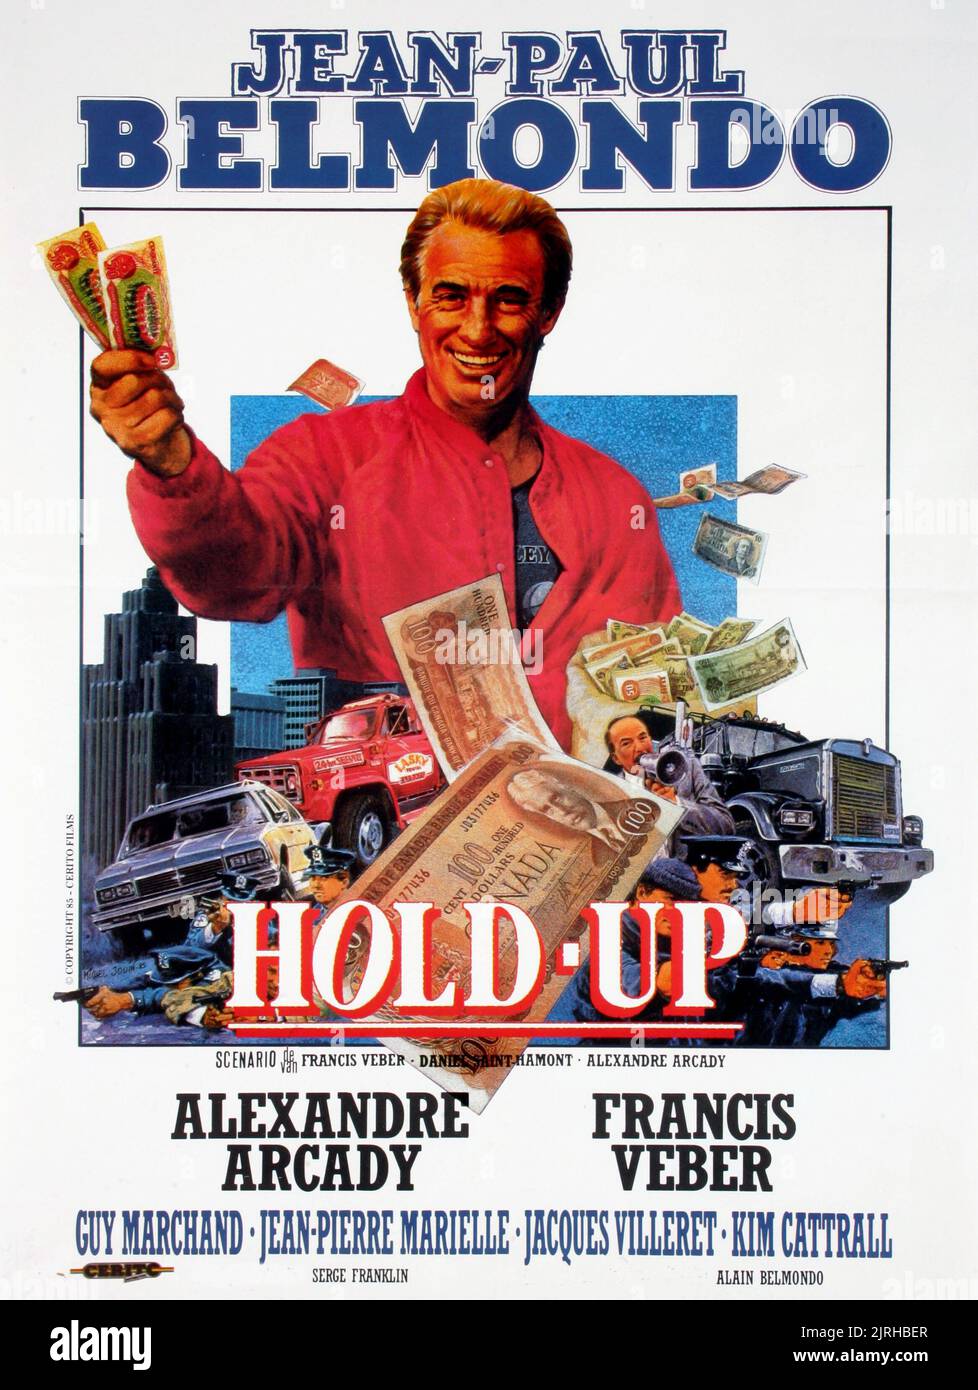 Hold-up de Alexandre Arcady (1985), synopsis, casting, diffusions